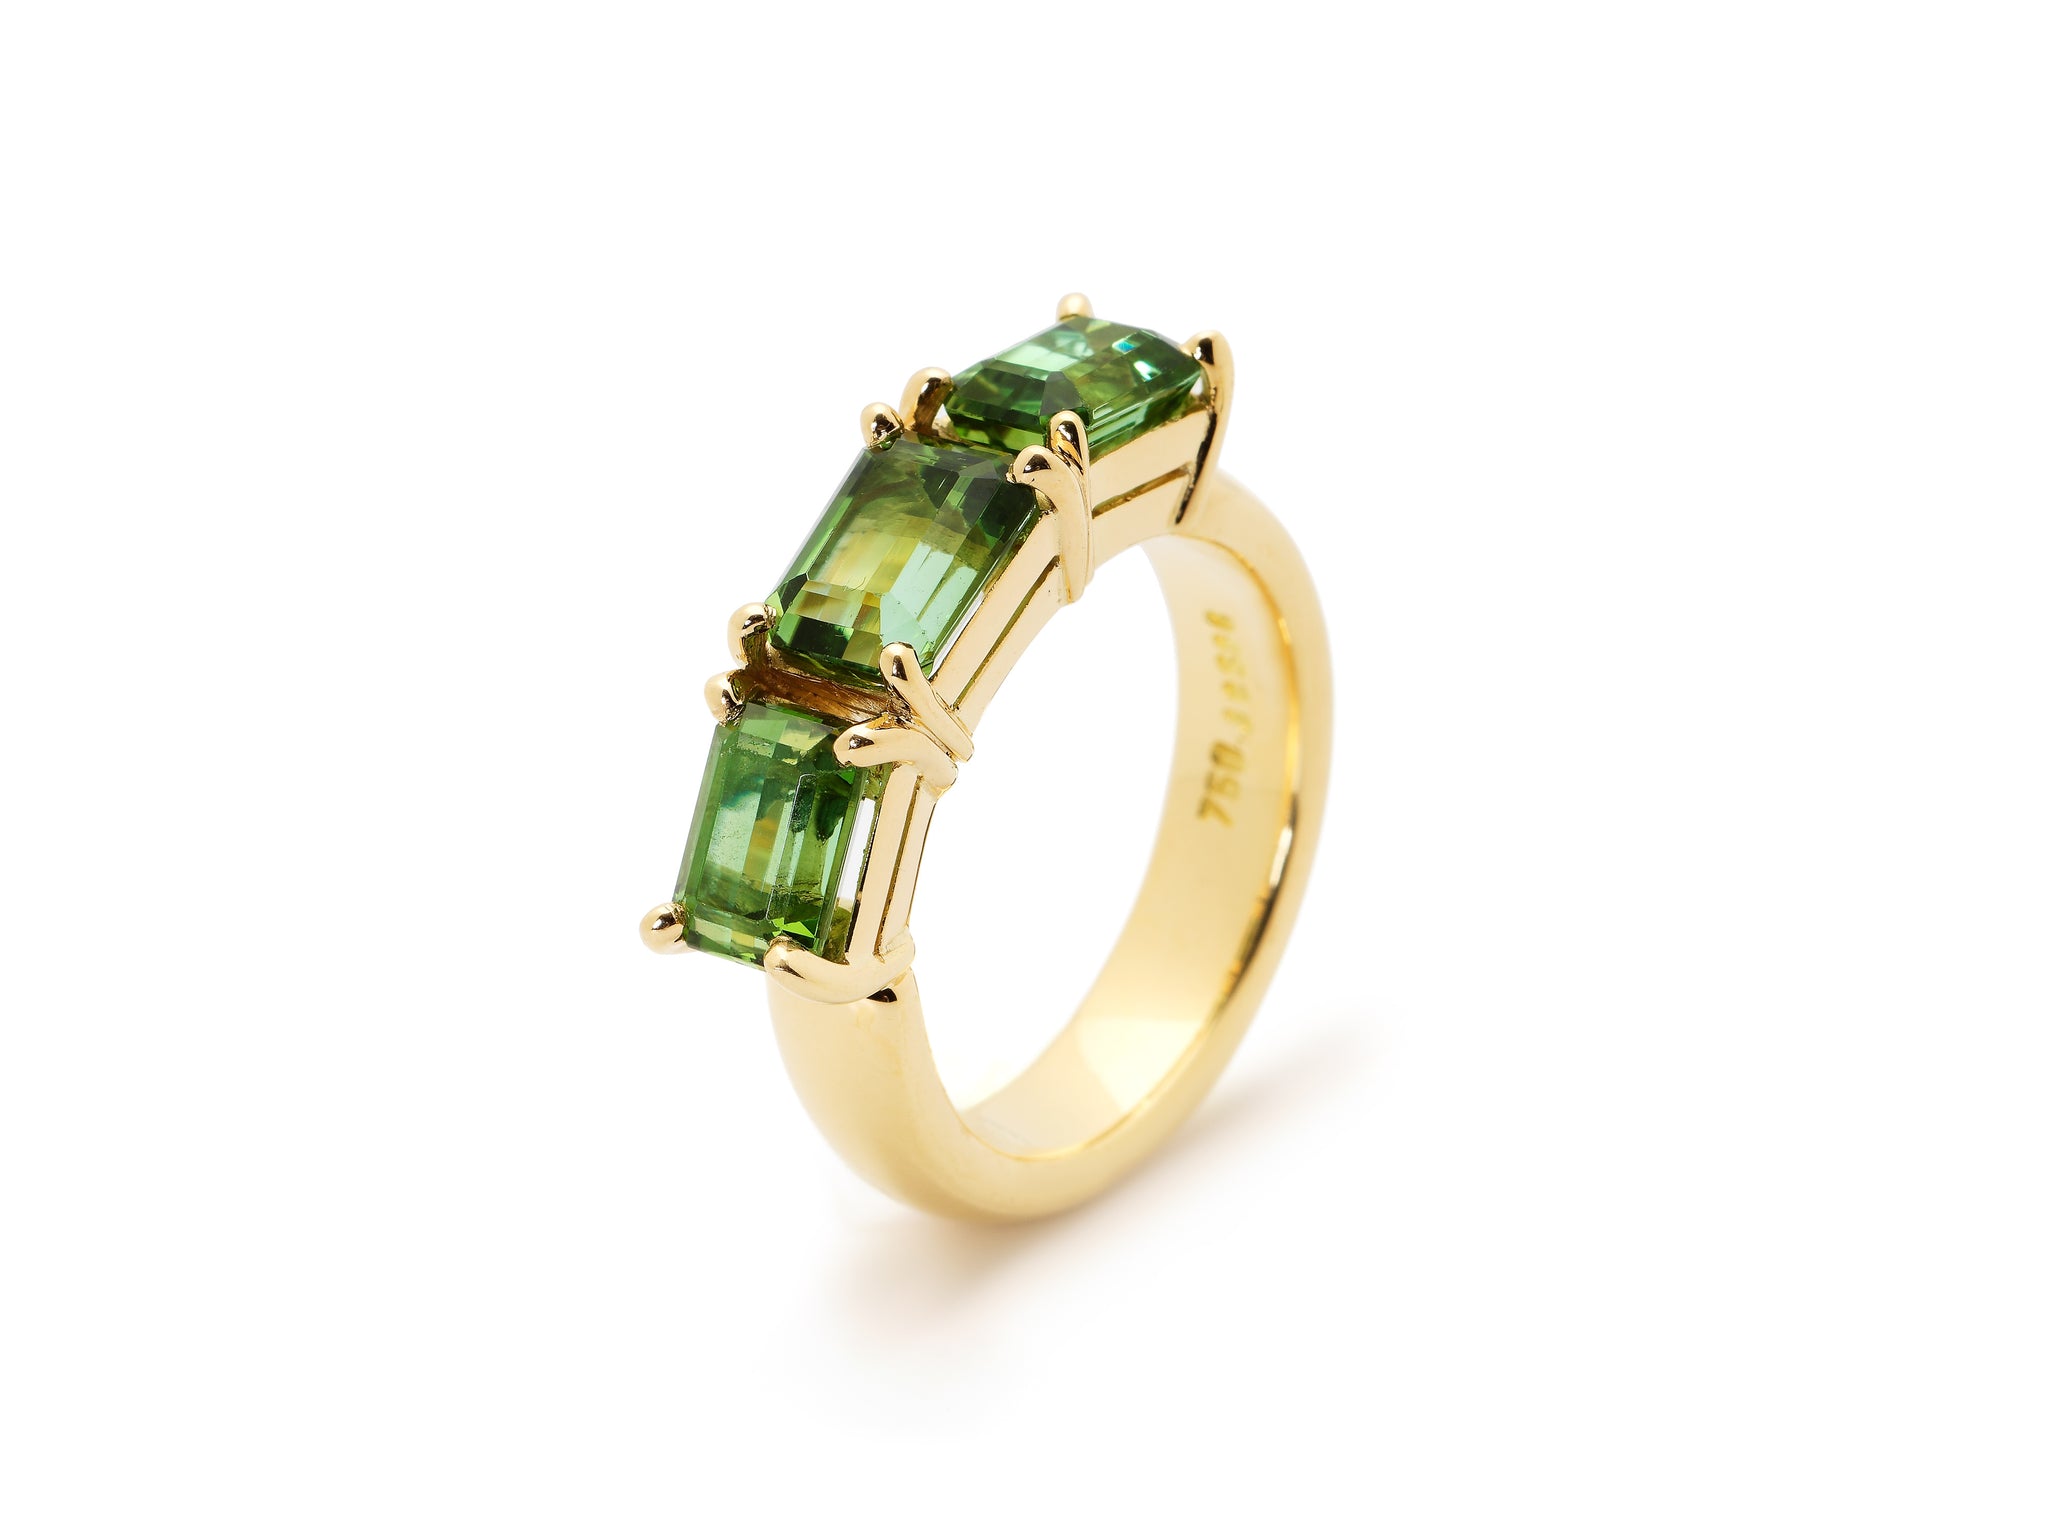 18 krt yellow gold ring set with 3 green emerald tourmalines